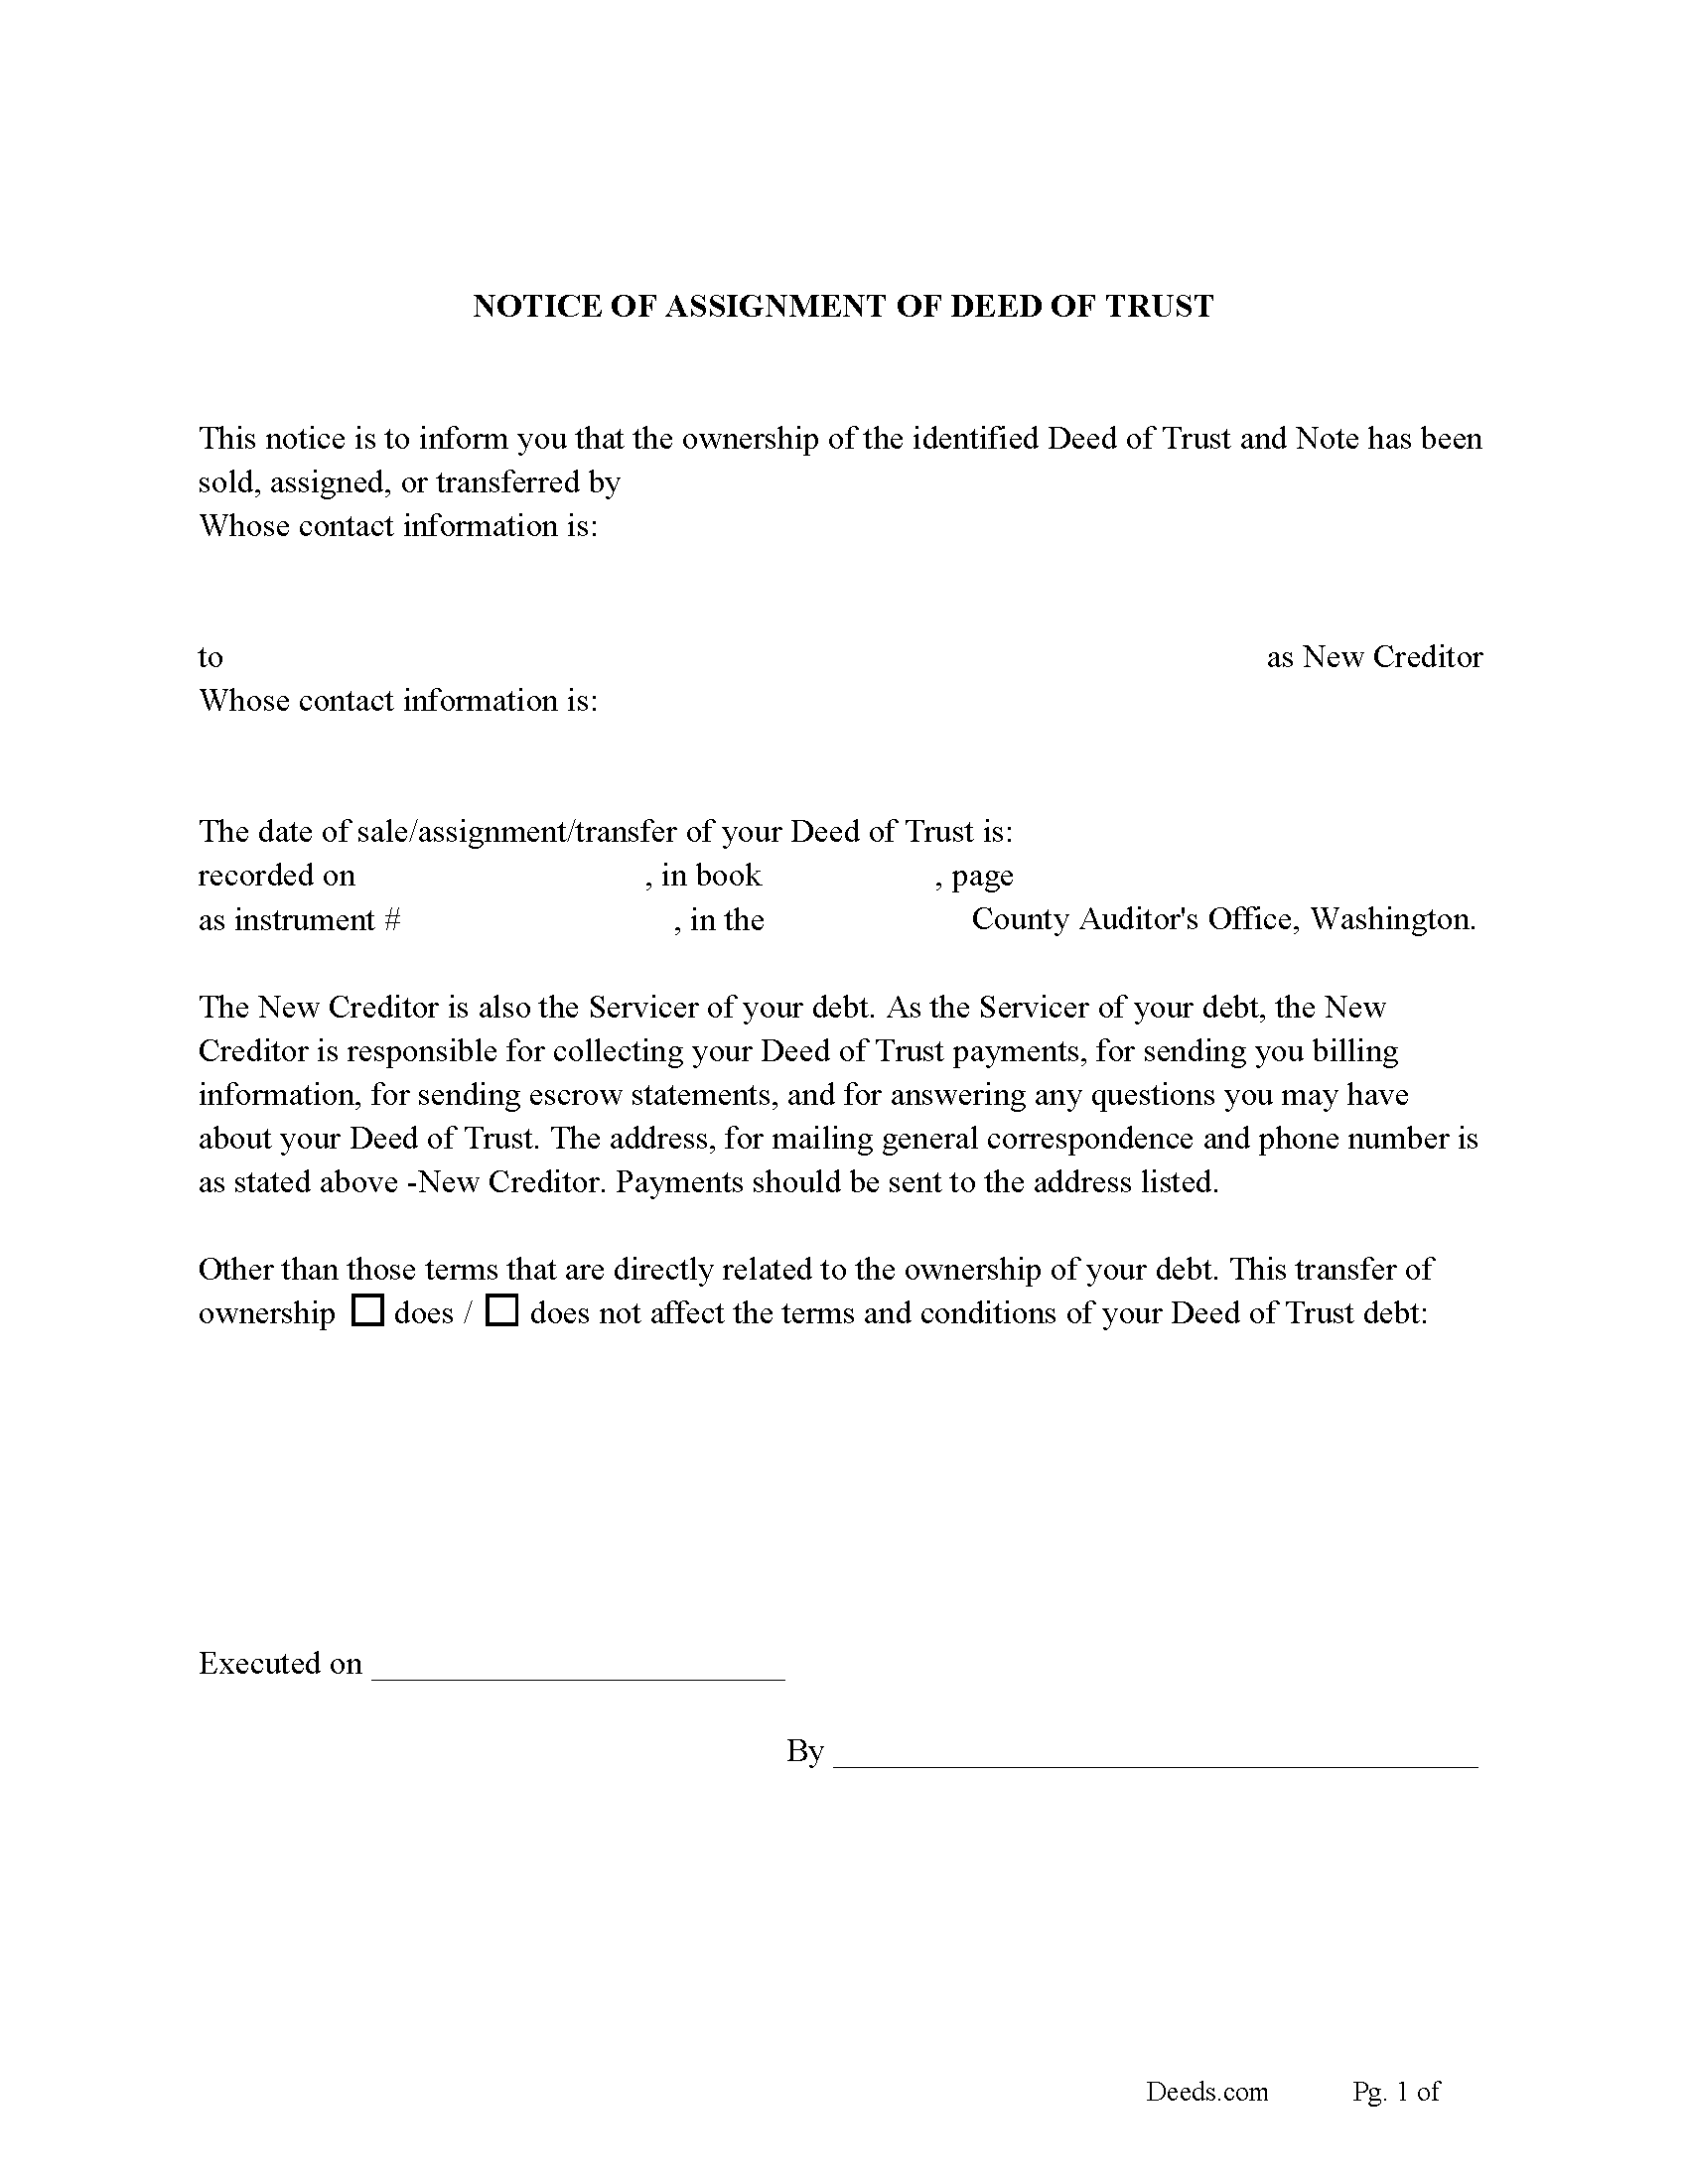 Notice of Assignment of Deed of Trust Form